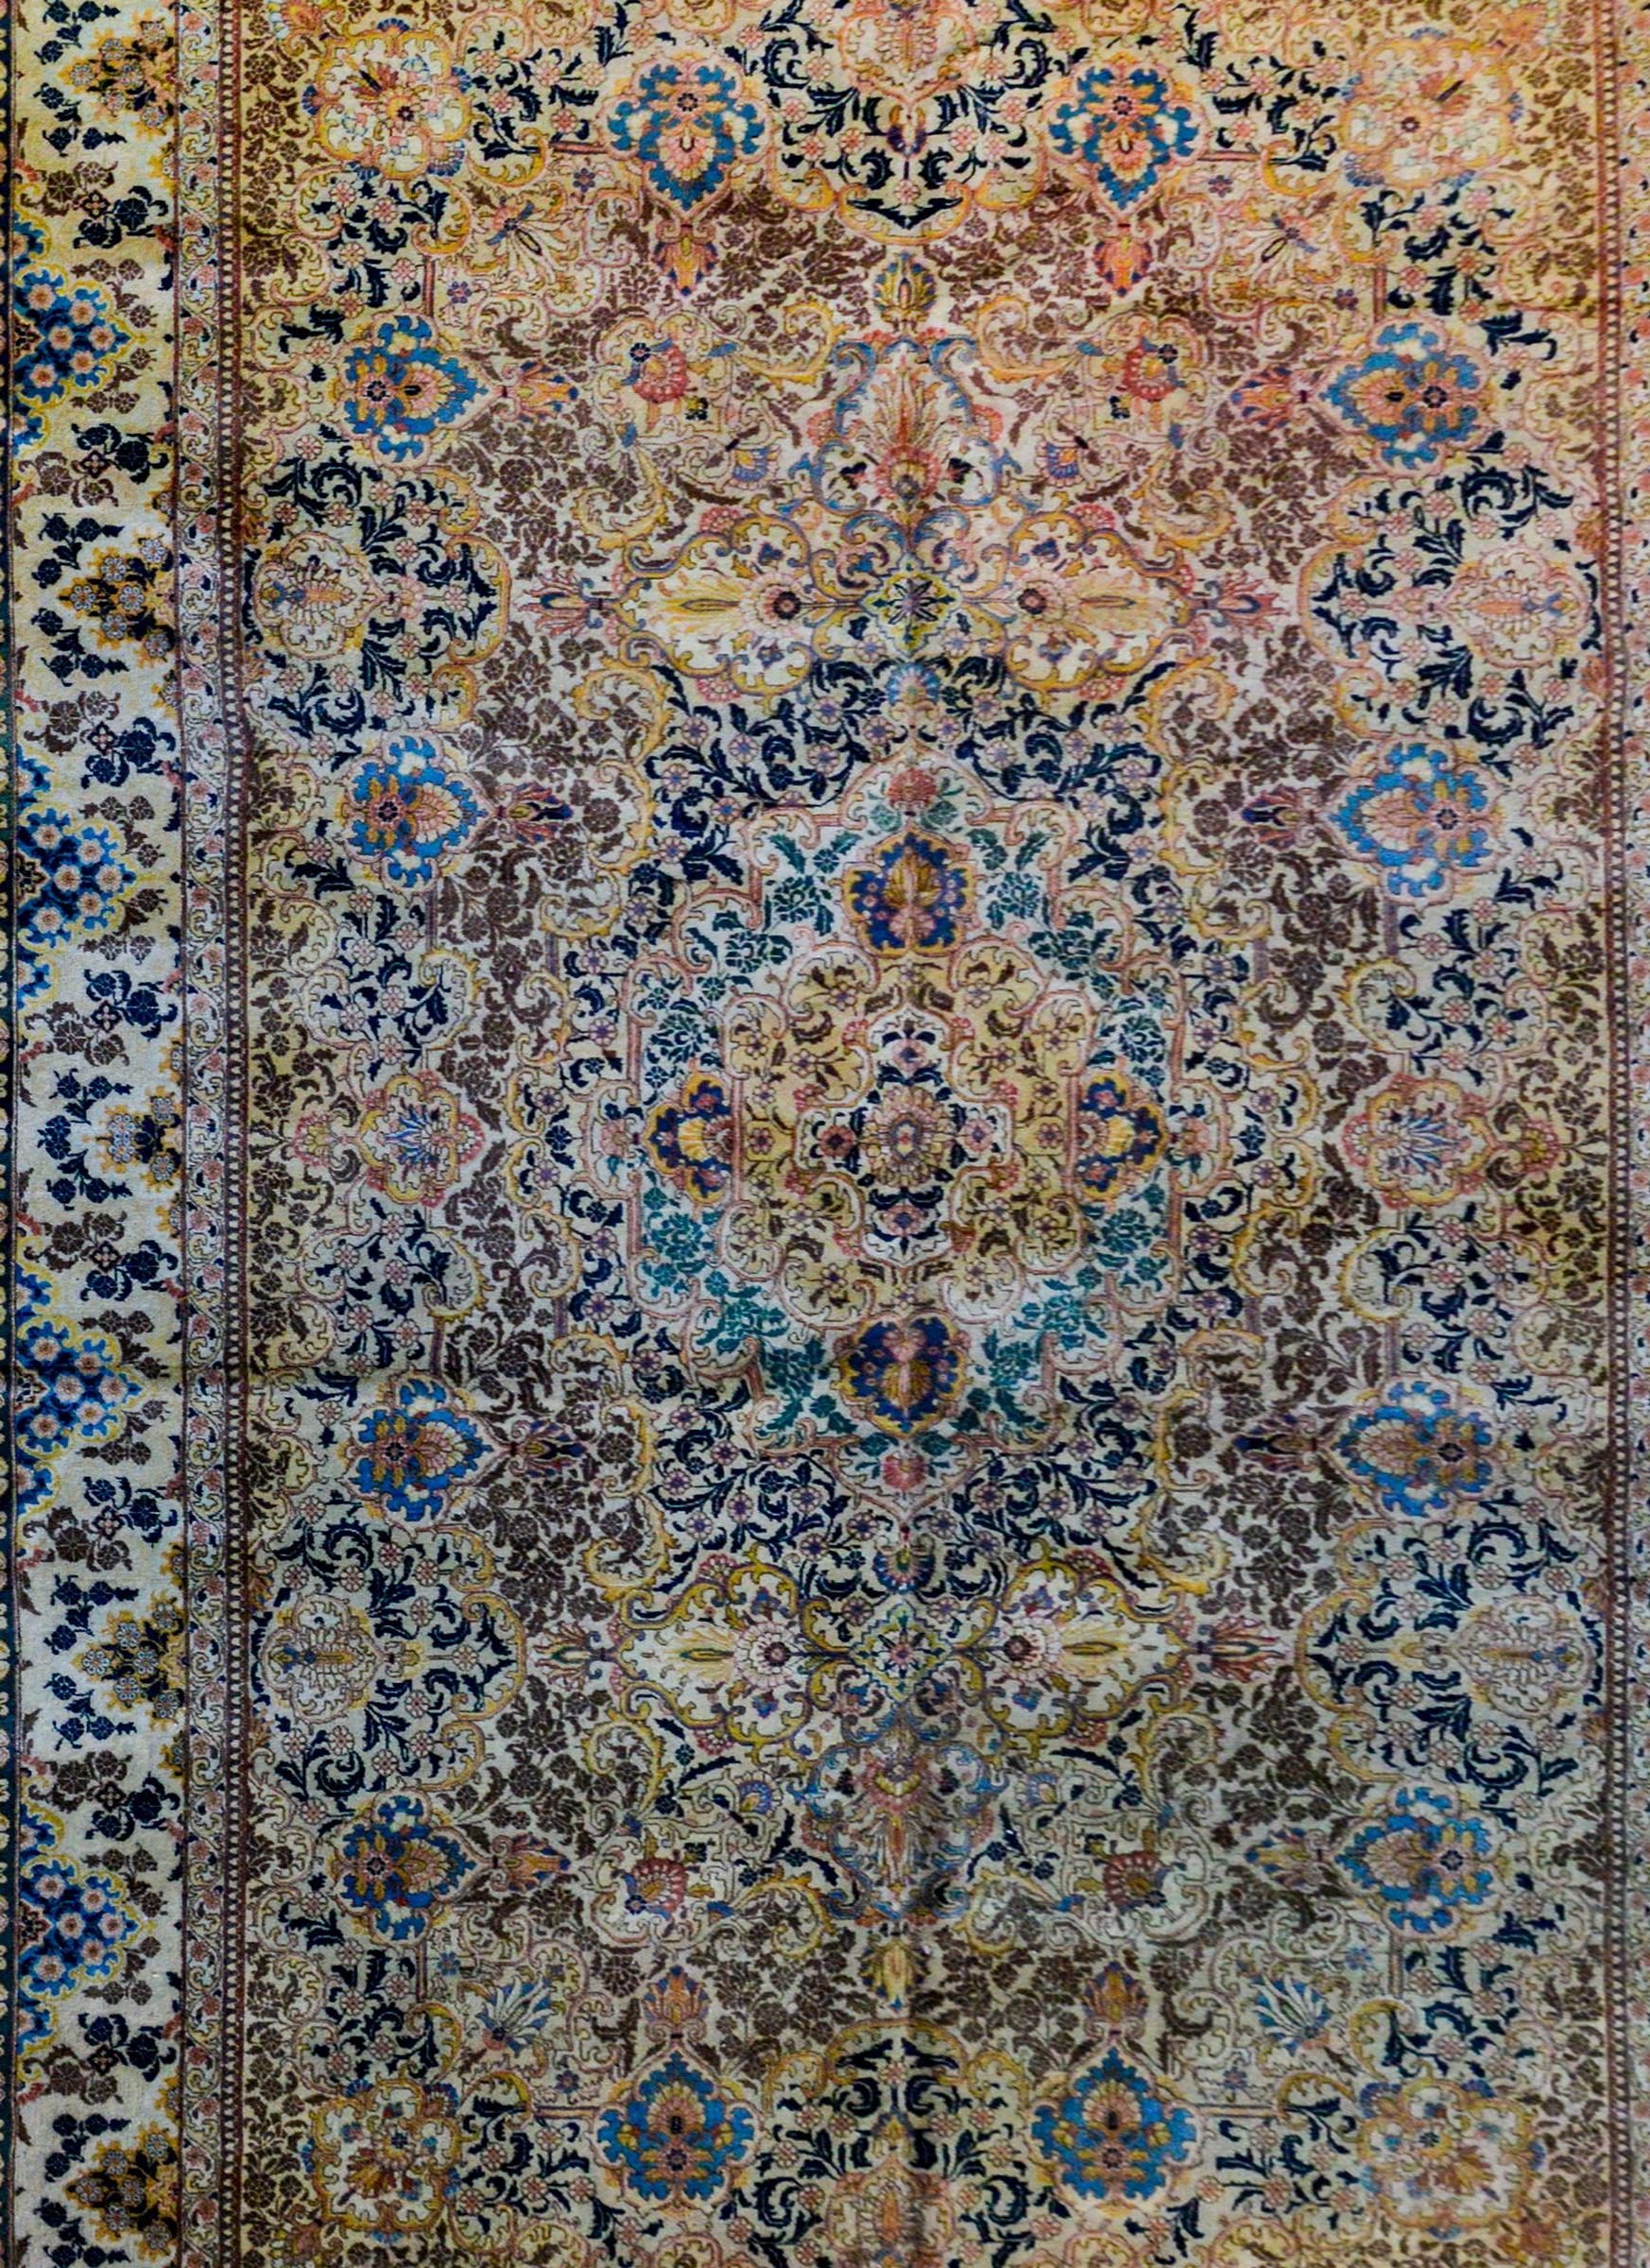 Persian Mesmerizing Early 20th Century Tabriz Rug For Sale